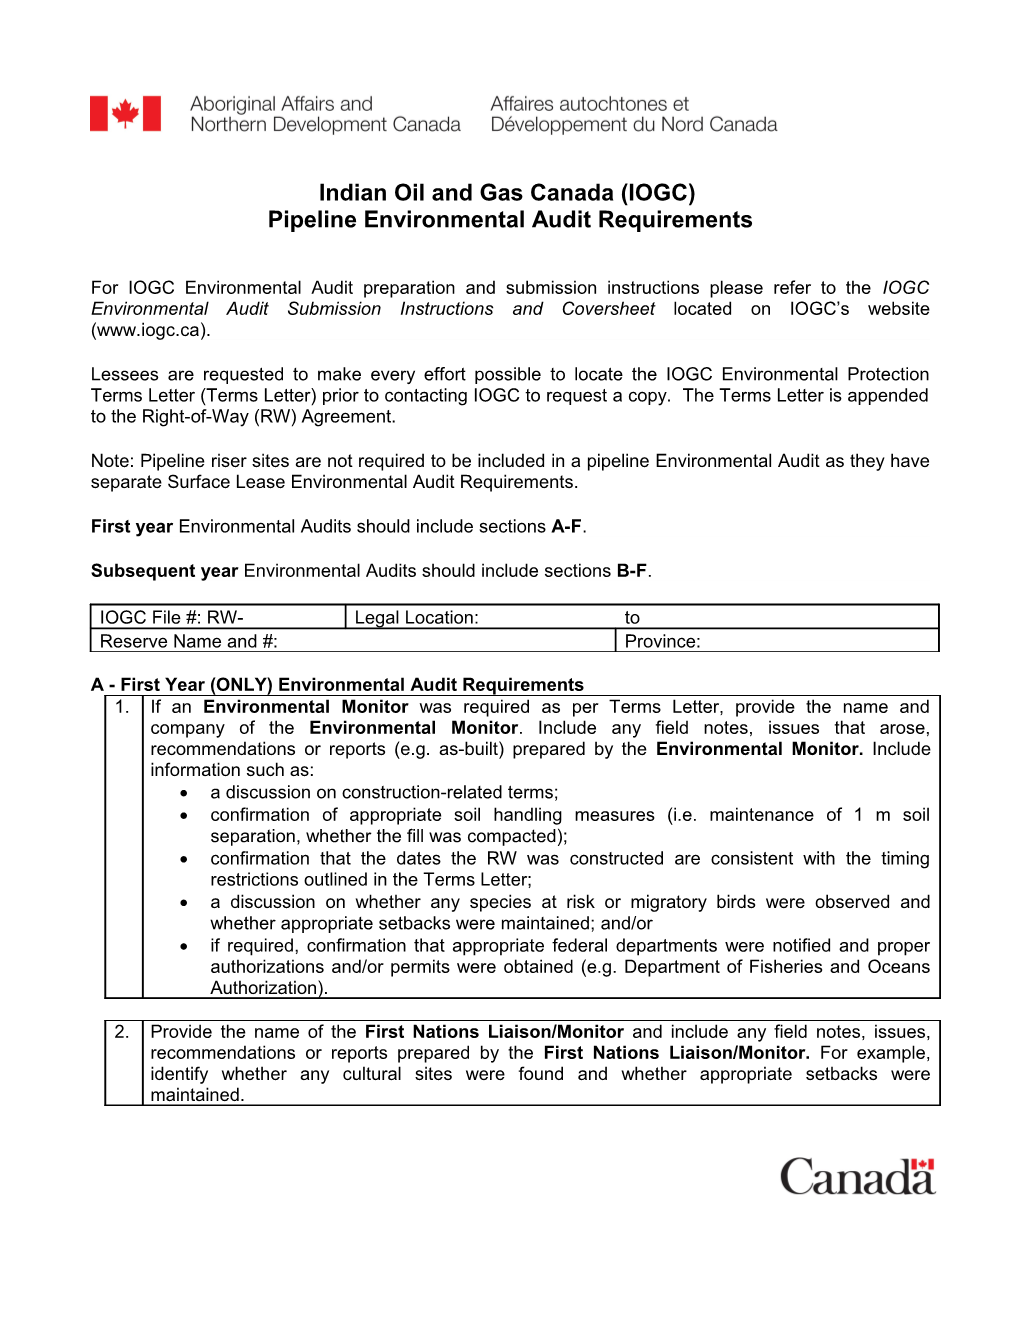 Indian Oil and Gas Canada (IOGC) Pipeline Right-Of-Way (RW) Environmental Audits Requirements